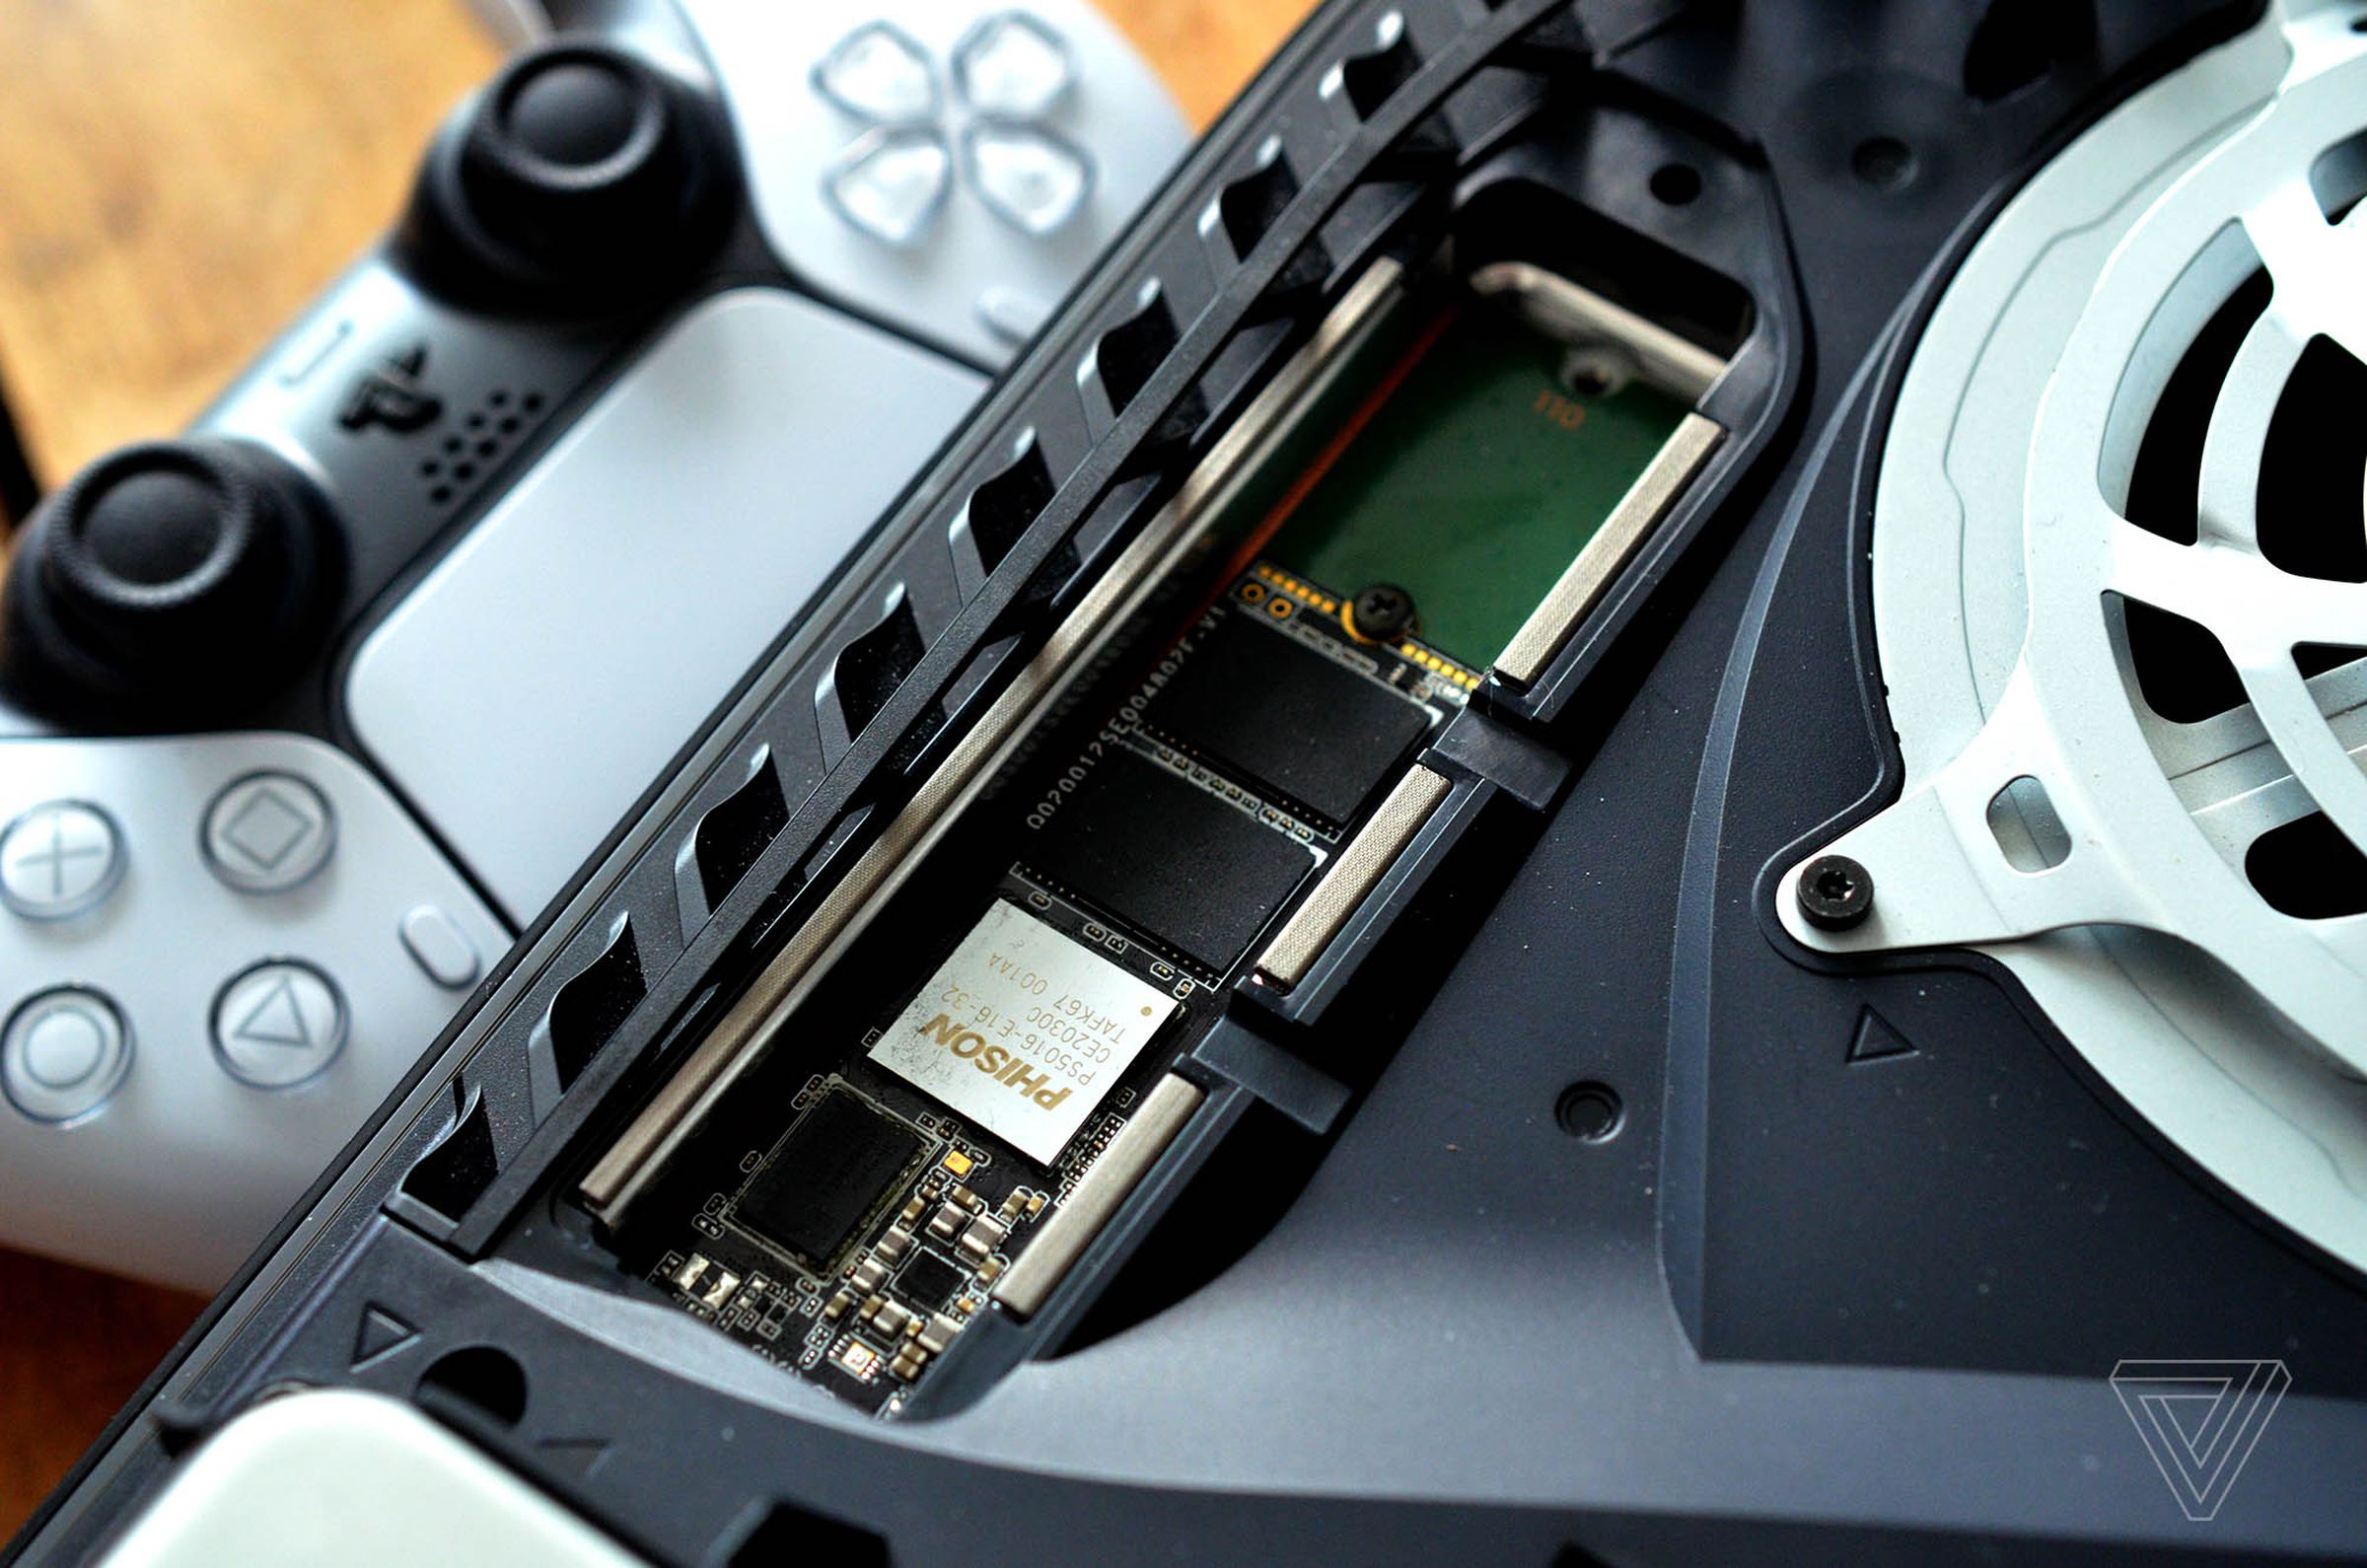 Sony’s M.2 SSD slot has a screw to fix your drive into place.